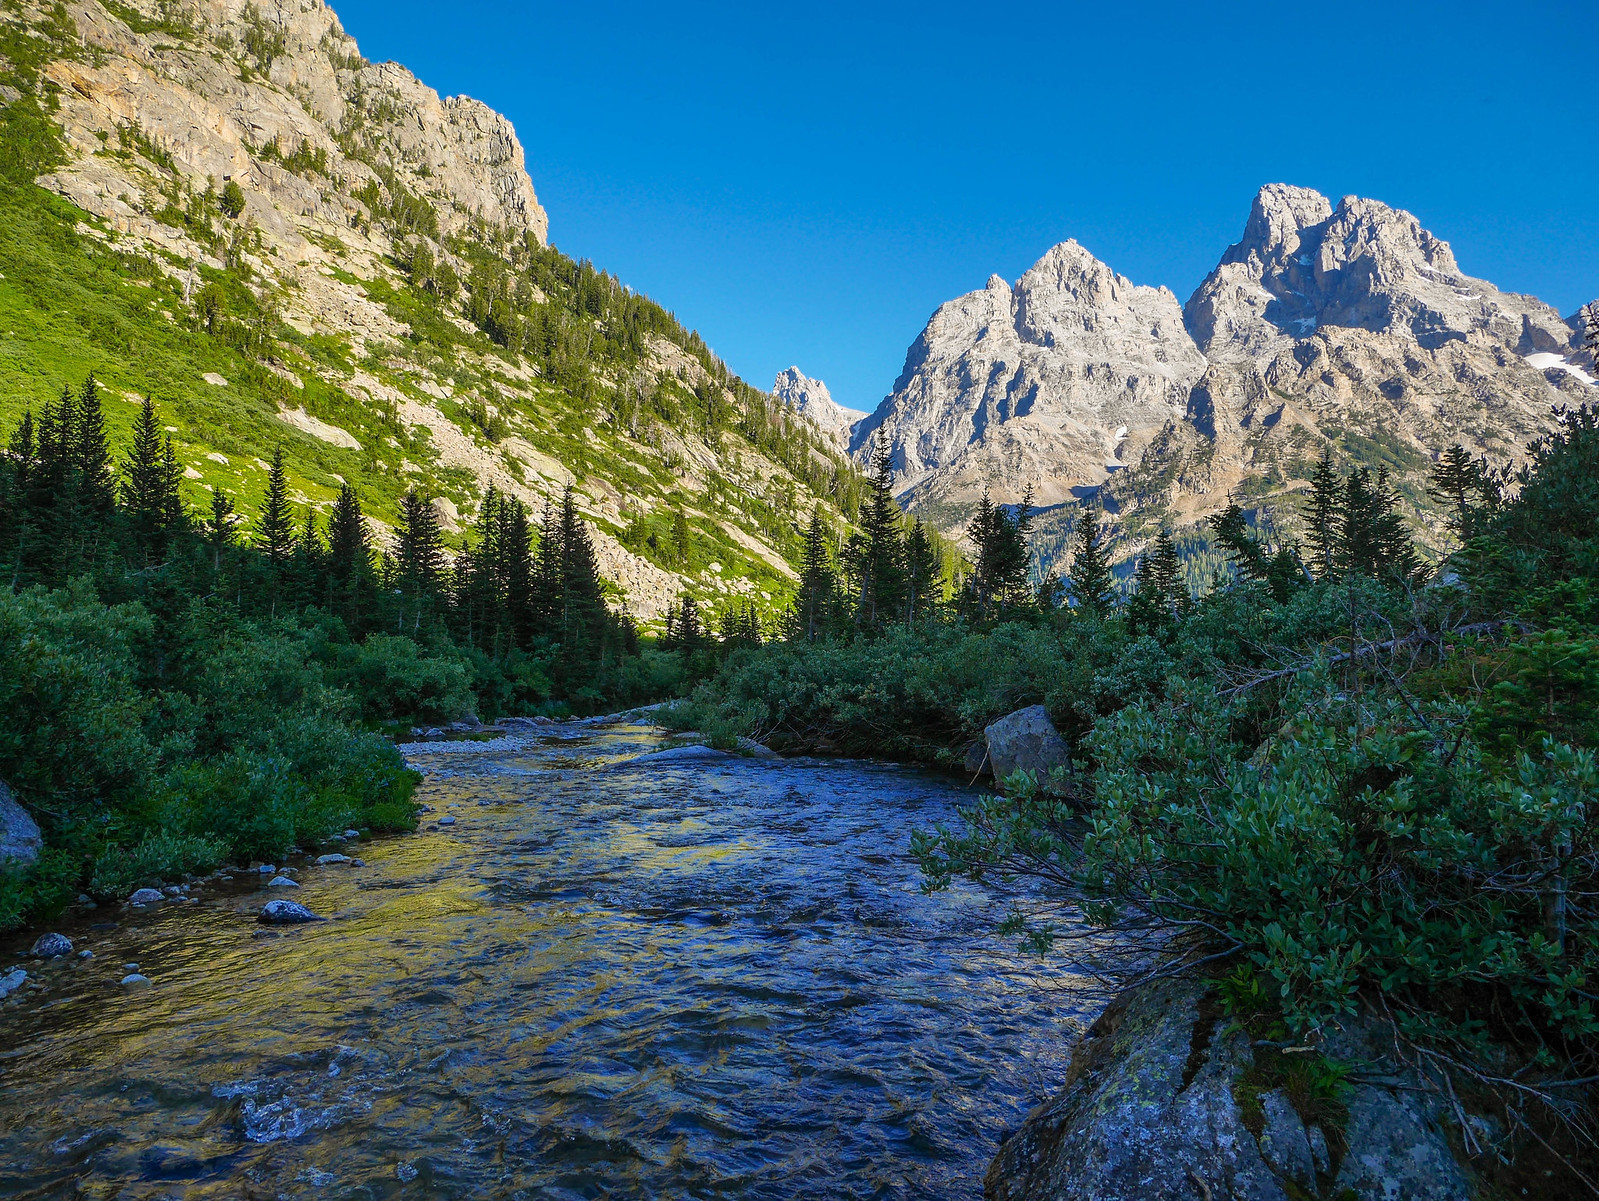 North Fork of Cascade Canyon